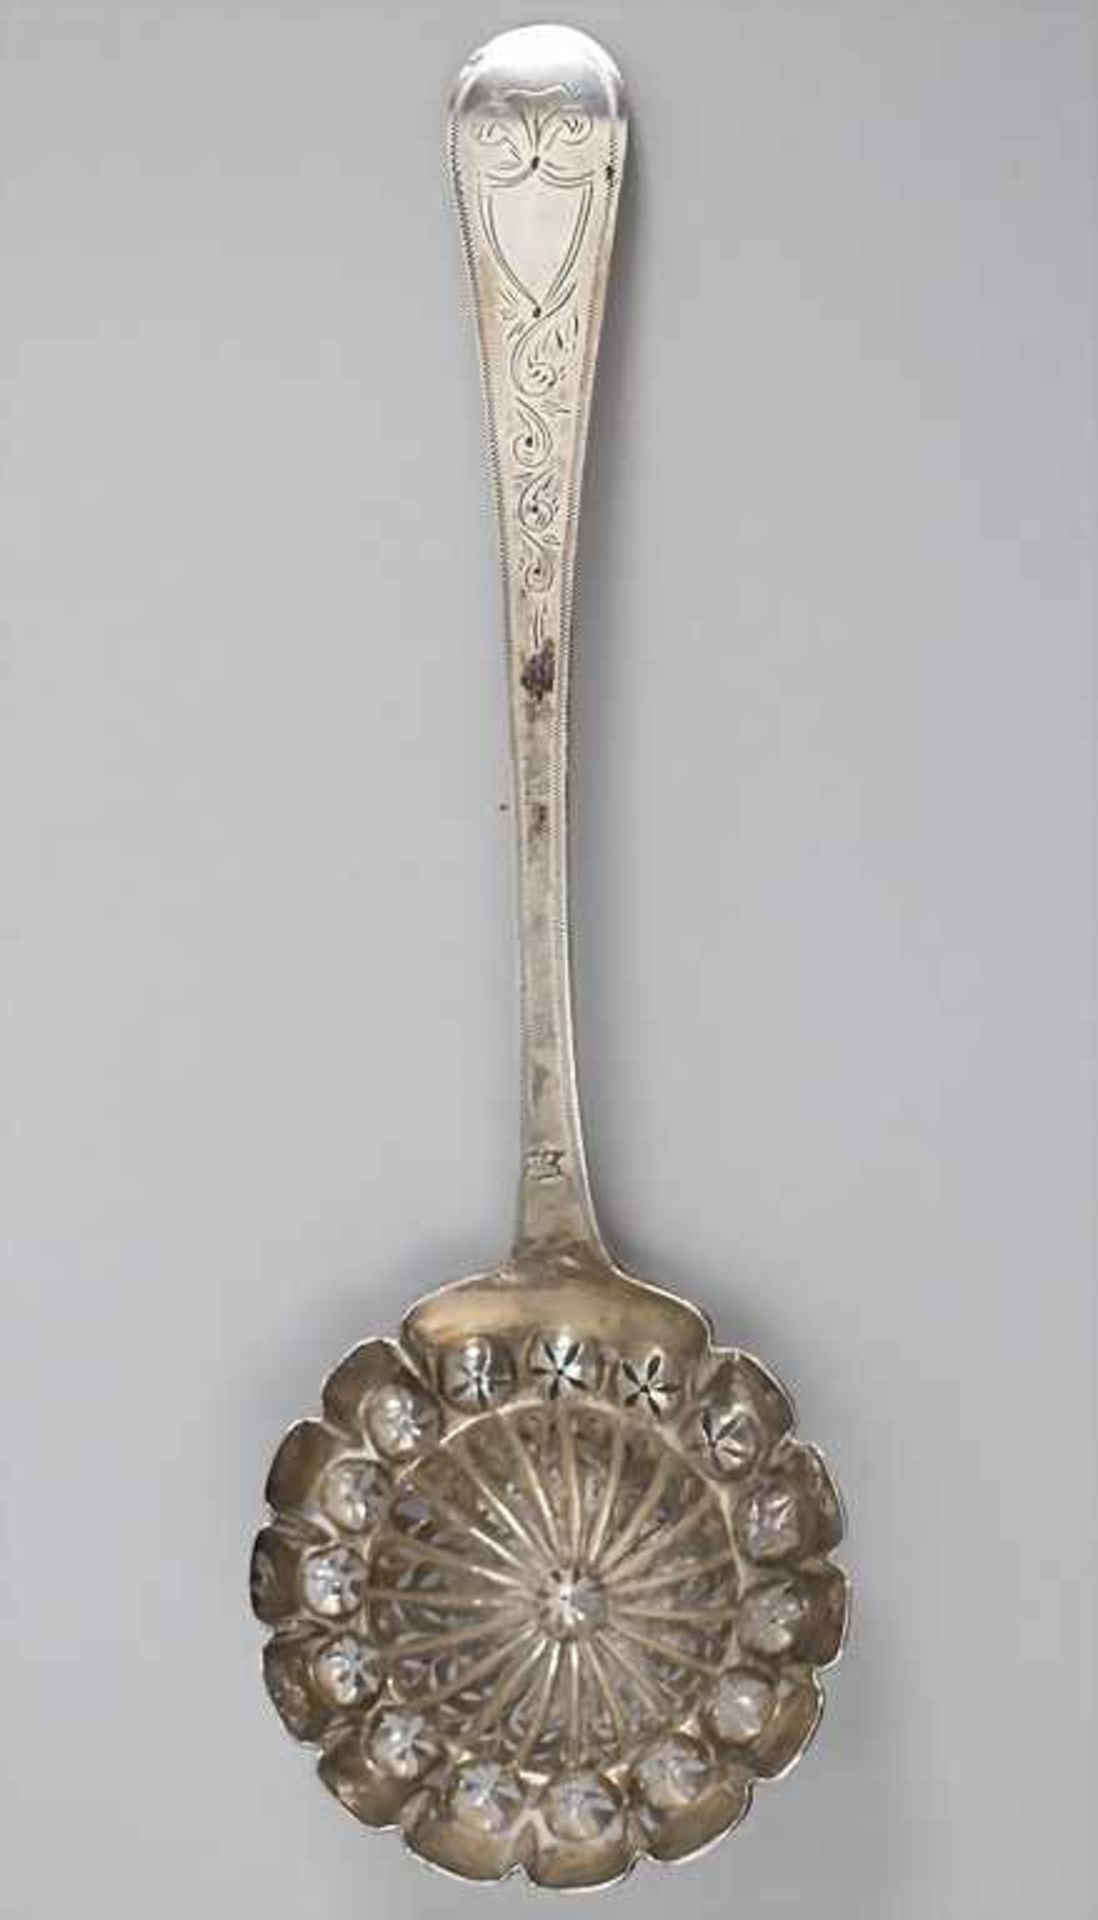 Zuckerstreulöffel / cuillere à sucre / saupoudreuse / A silver sugar-sprinkler spoon with a chimera,